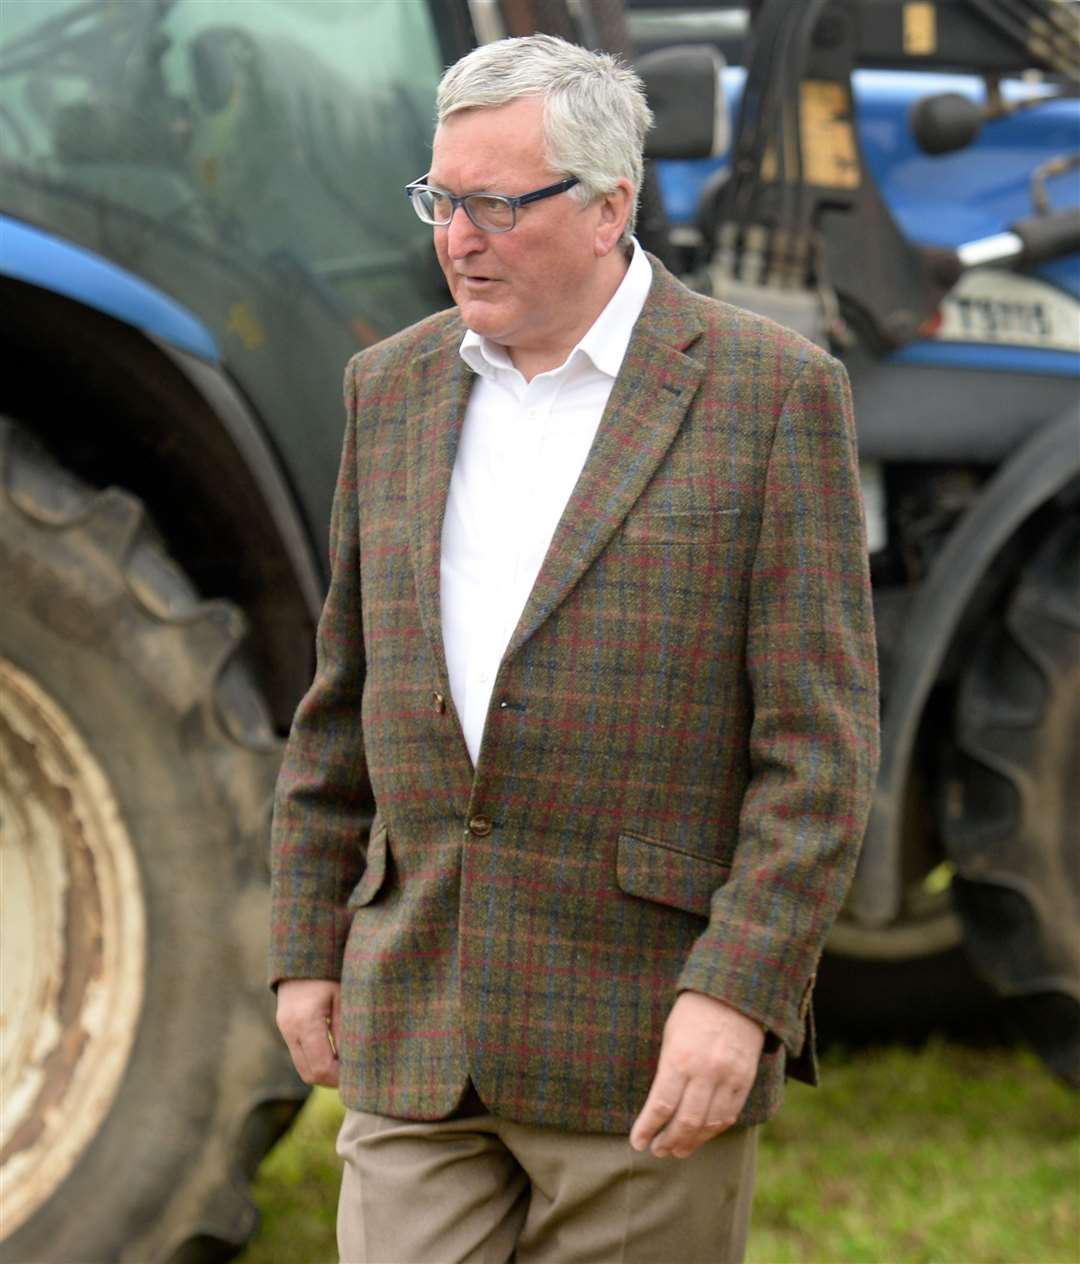 MSP Fergus Ewing: Serious A95 issues at Drumuillie to discuss